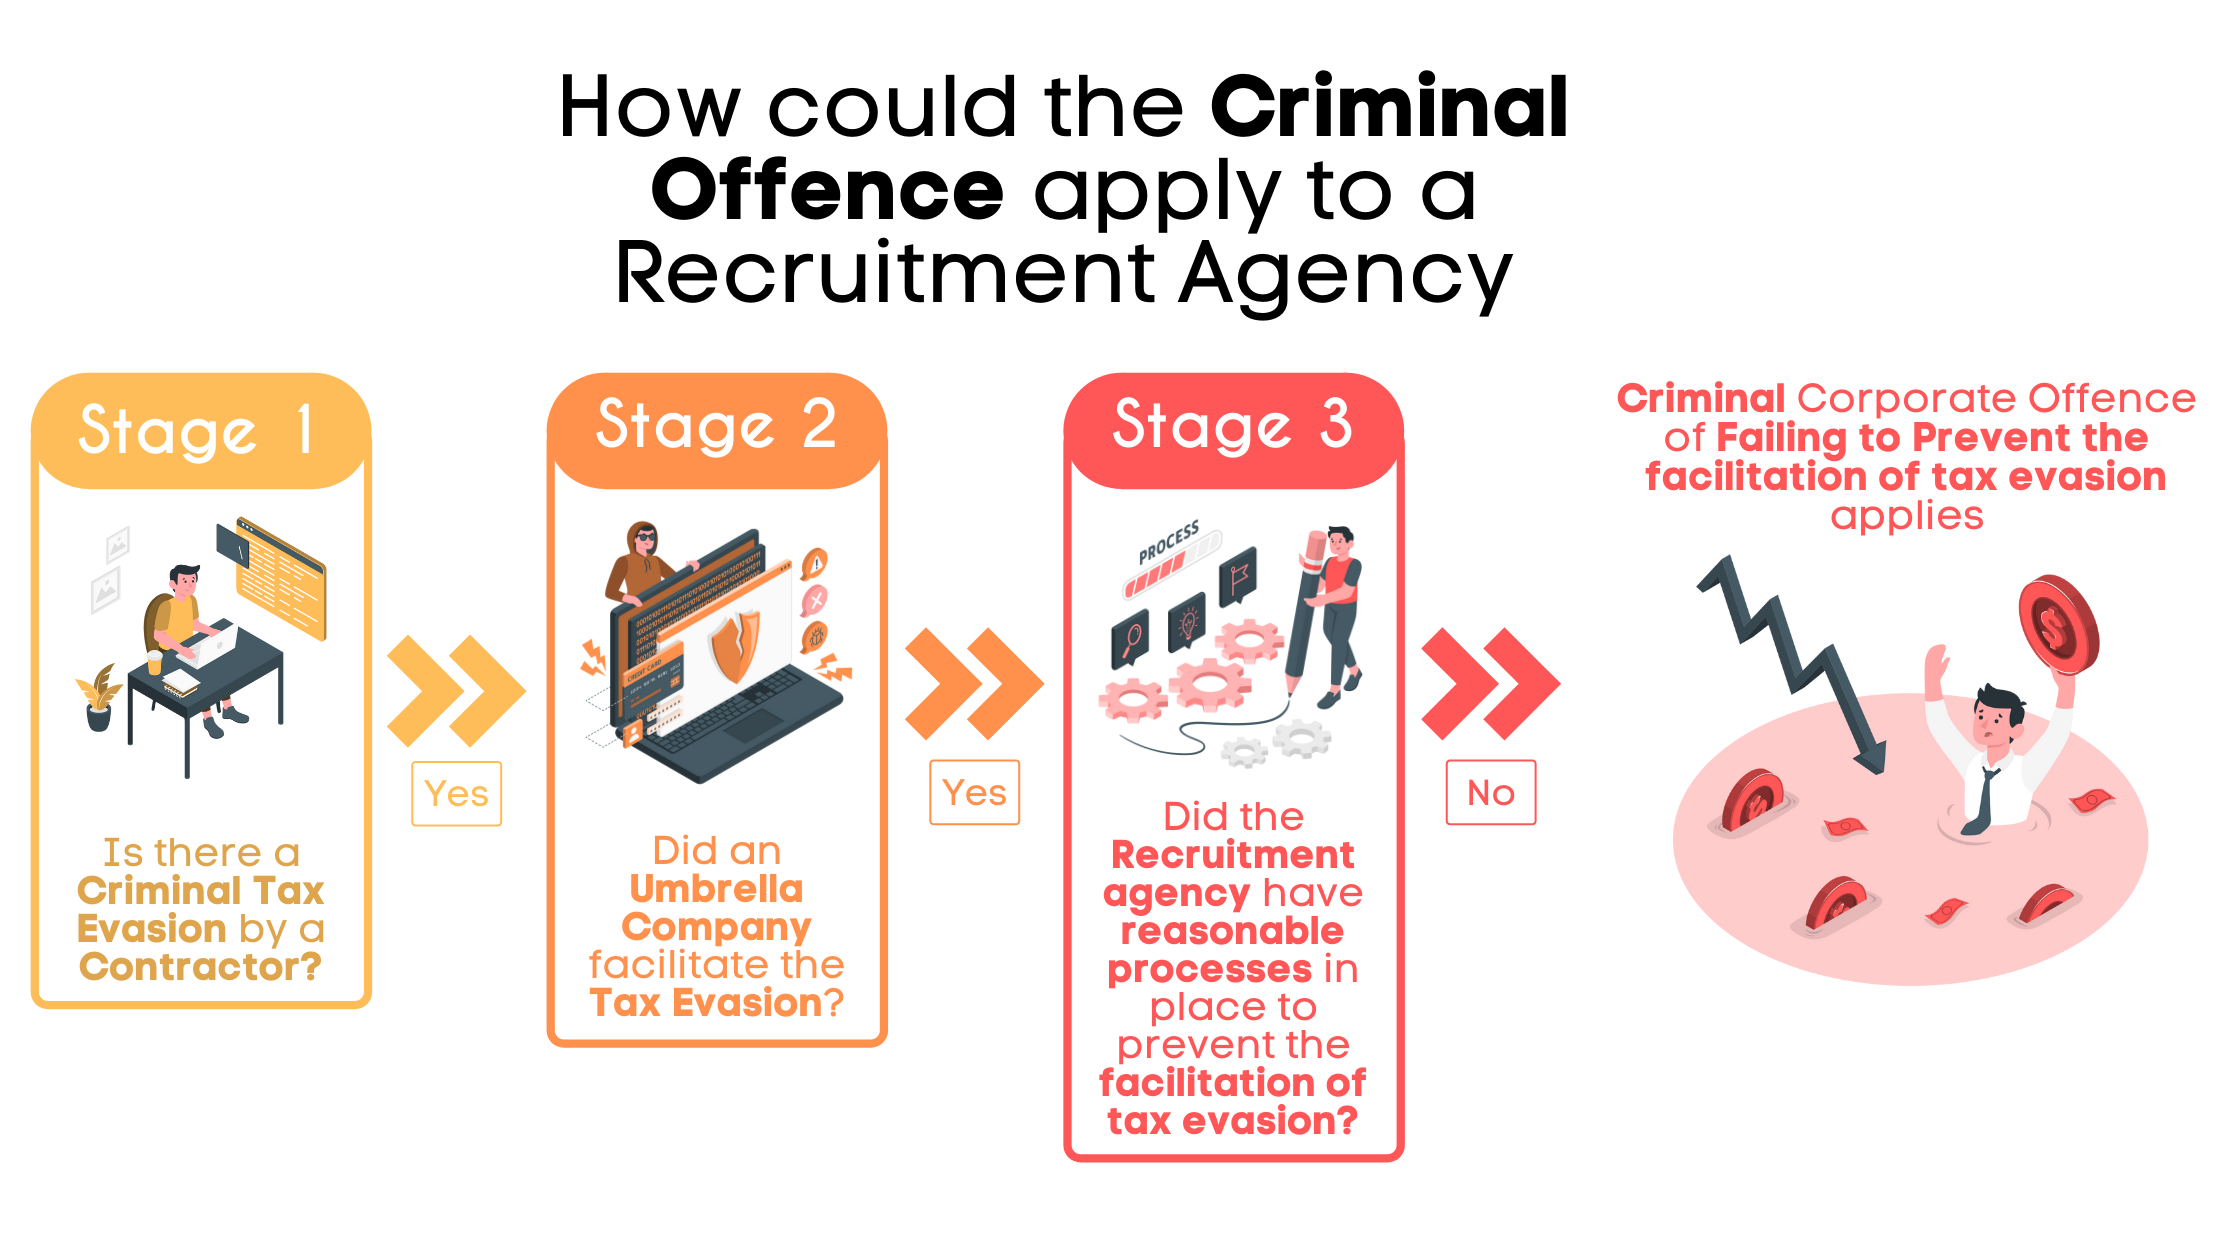 How could the Criminal Offence apply to a Recruitment Agency?